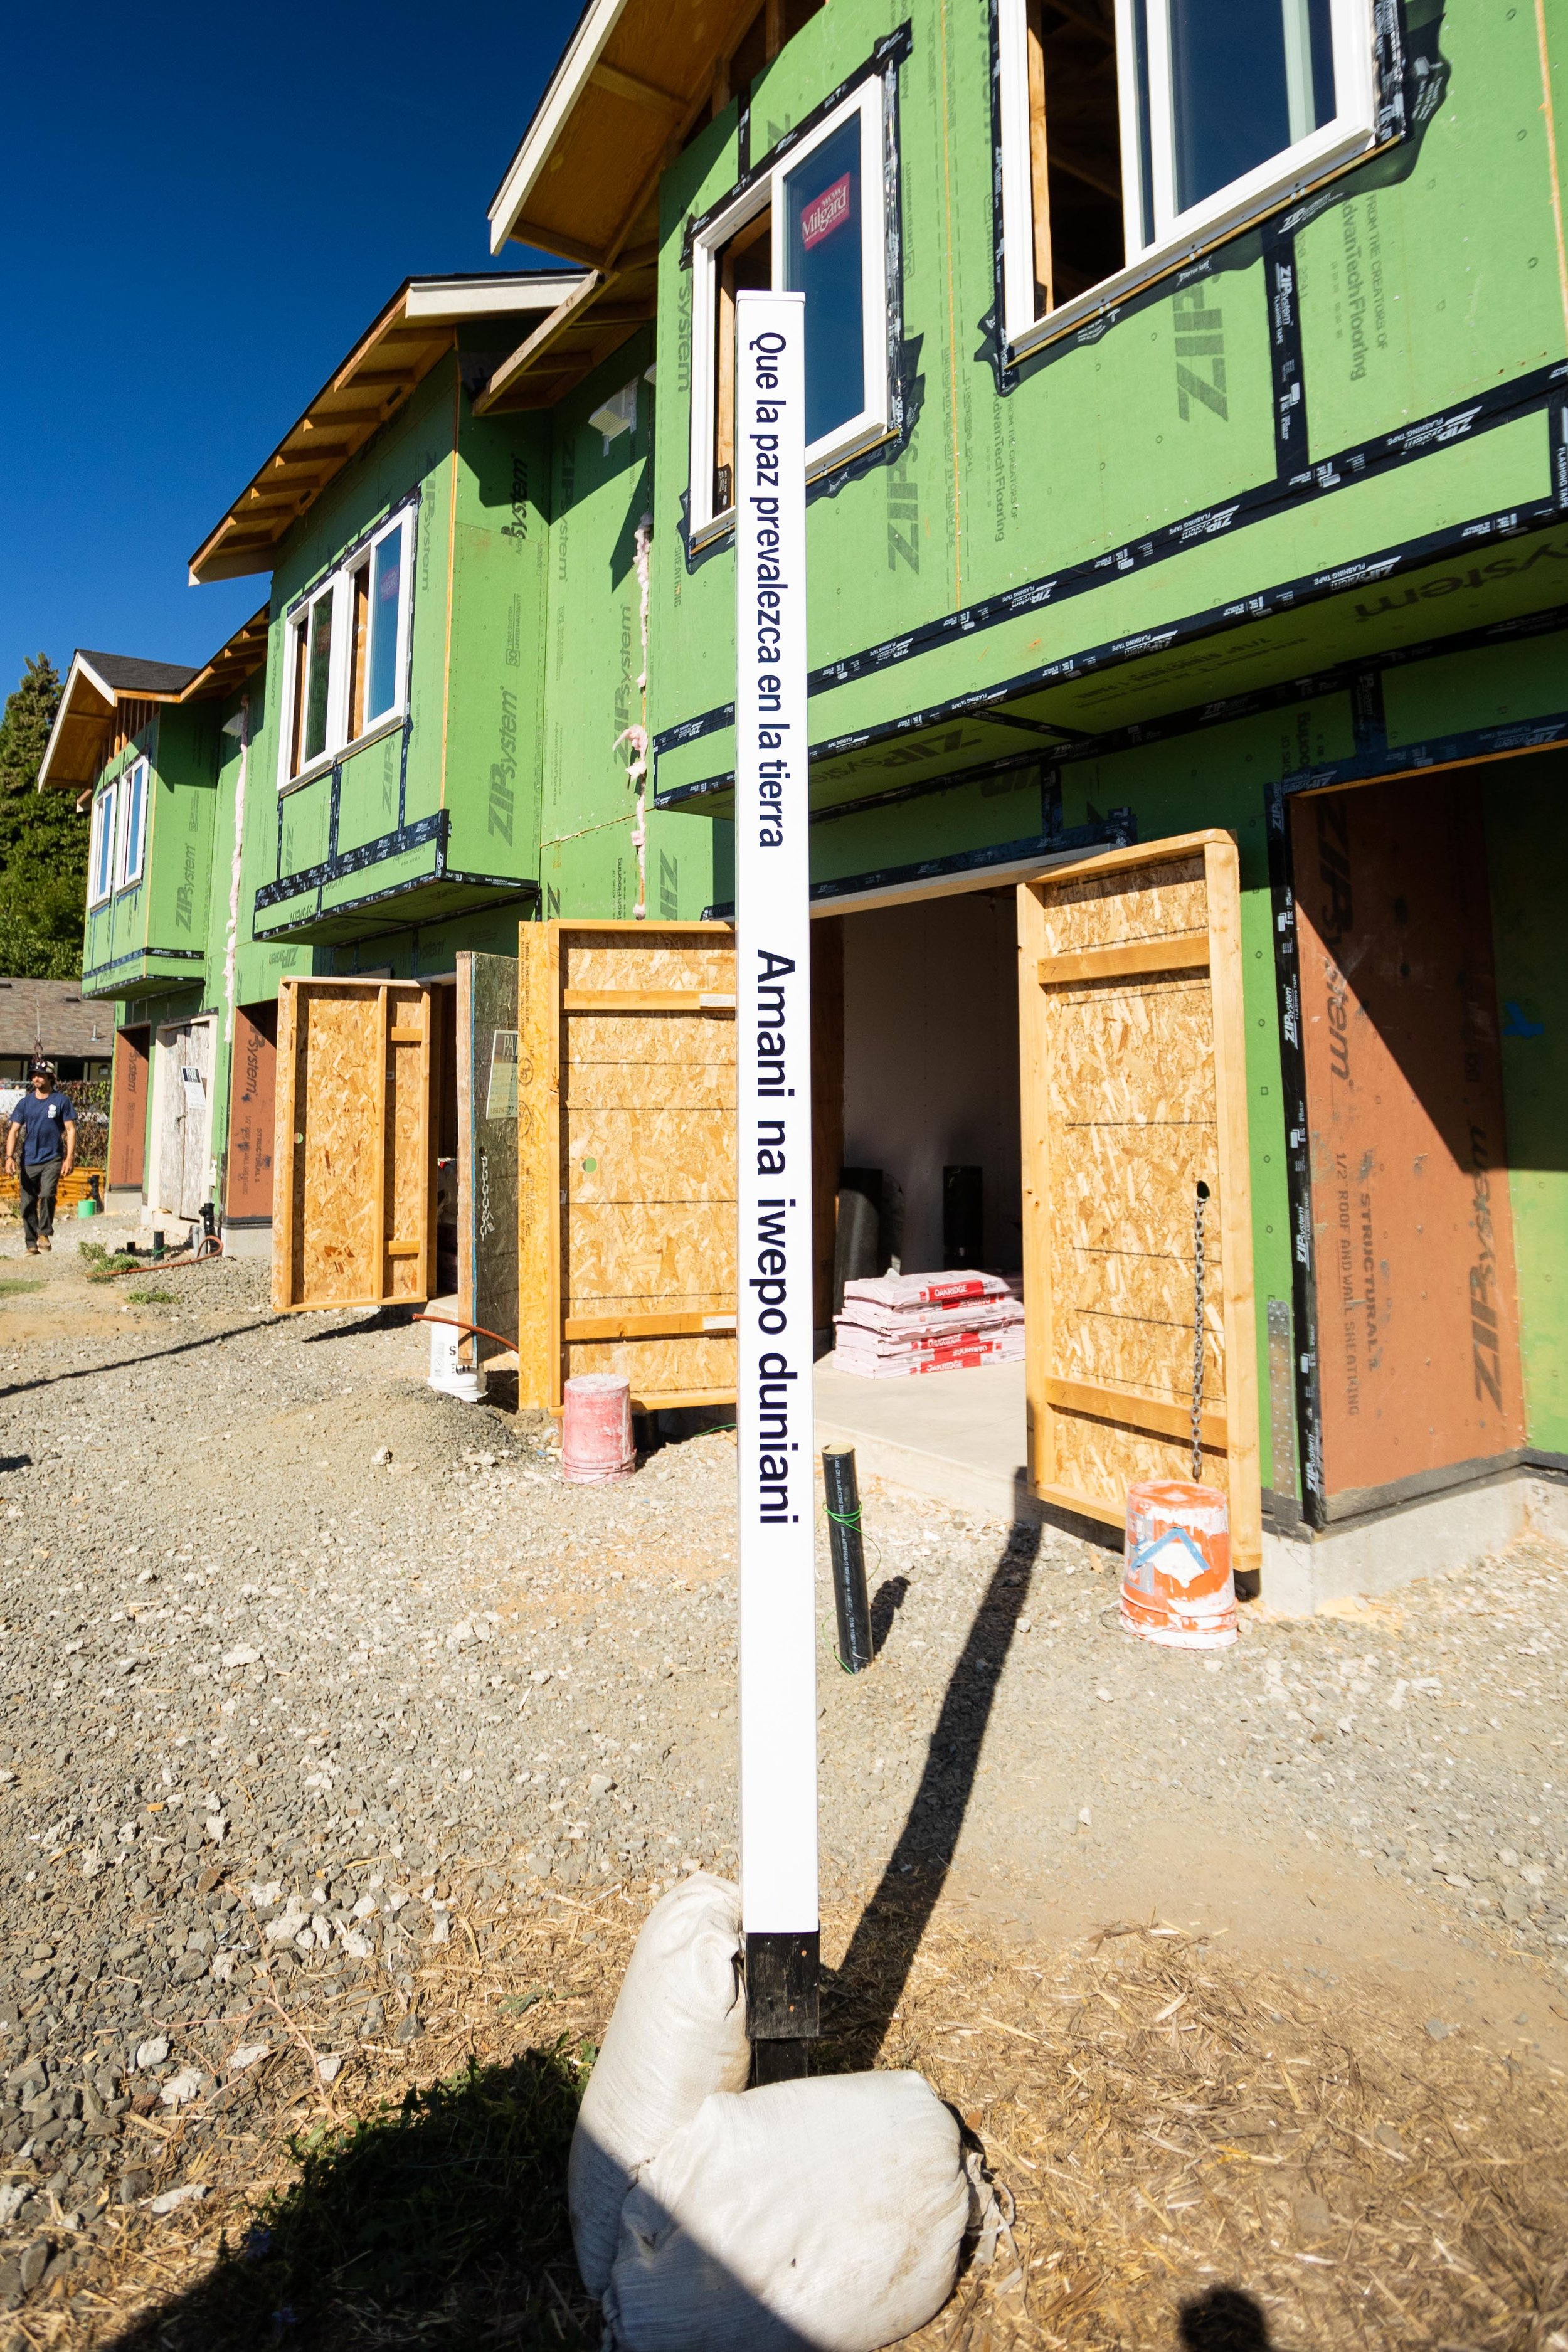  Hillsboro, OR - Working with Habitat For Humanity, the Oregon Peace Builders planted and dedicated a Peace Pole at Alder Commons homesites Saturday Sept. 24 